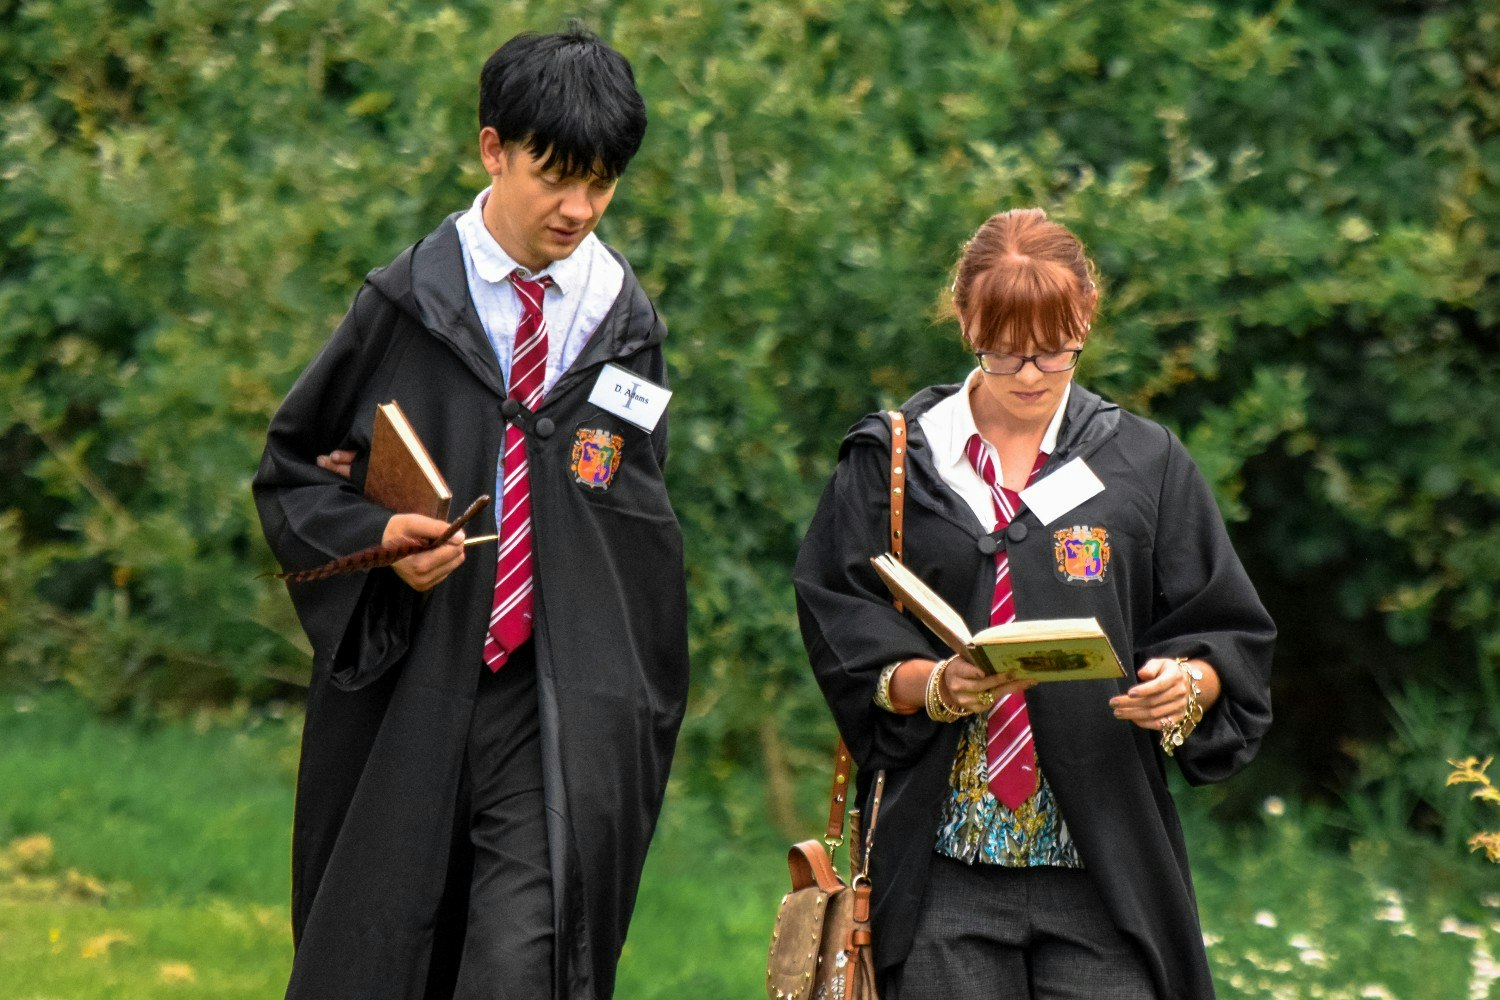 Two students at Bothwell School of Witchcraft